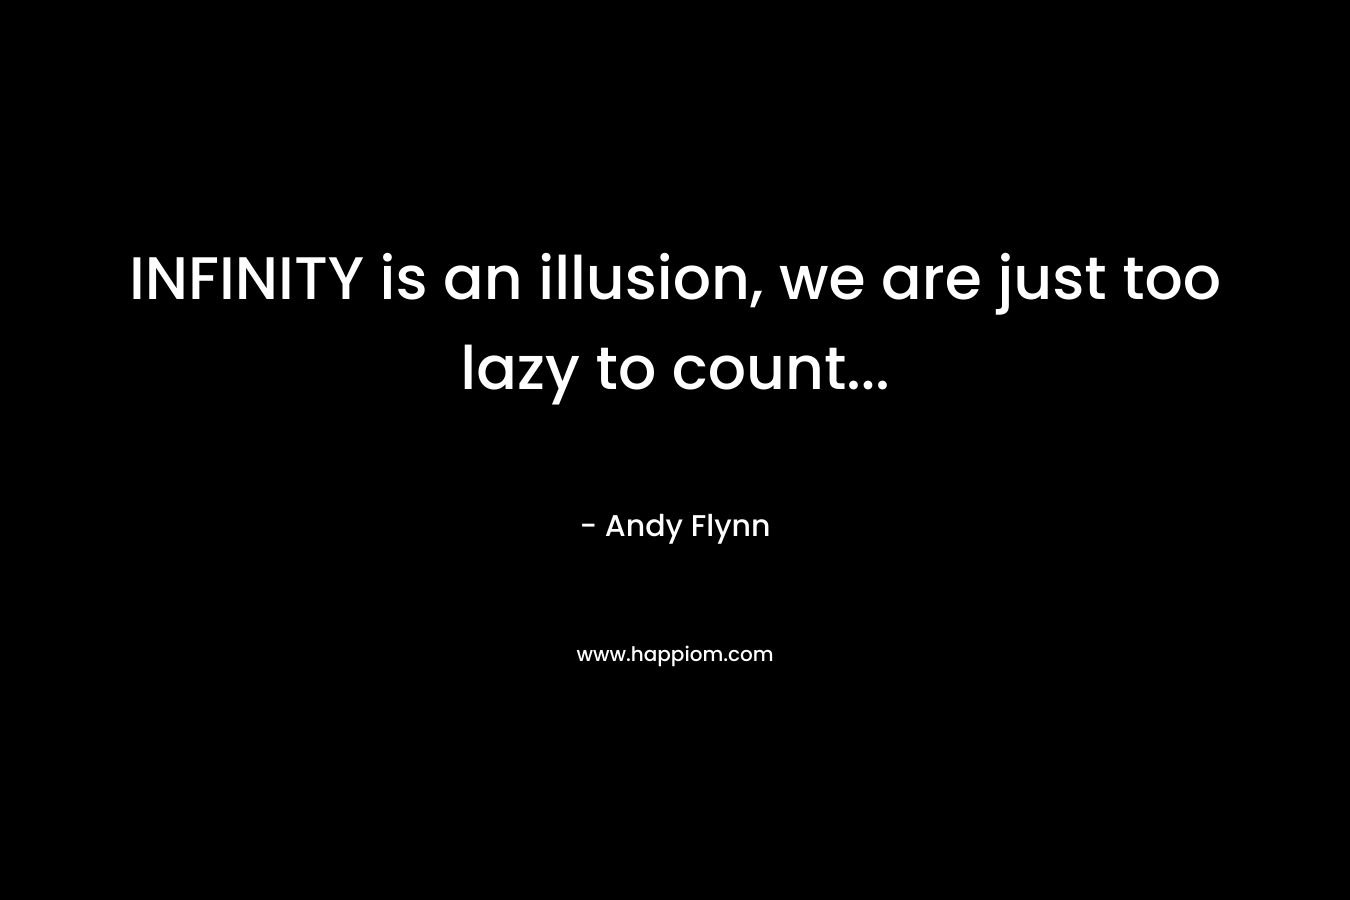 INFINITY is an illusion, we are just too lazy to count...